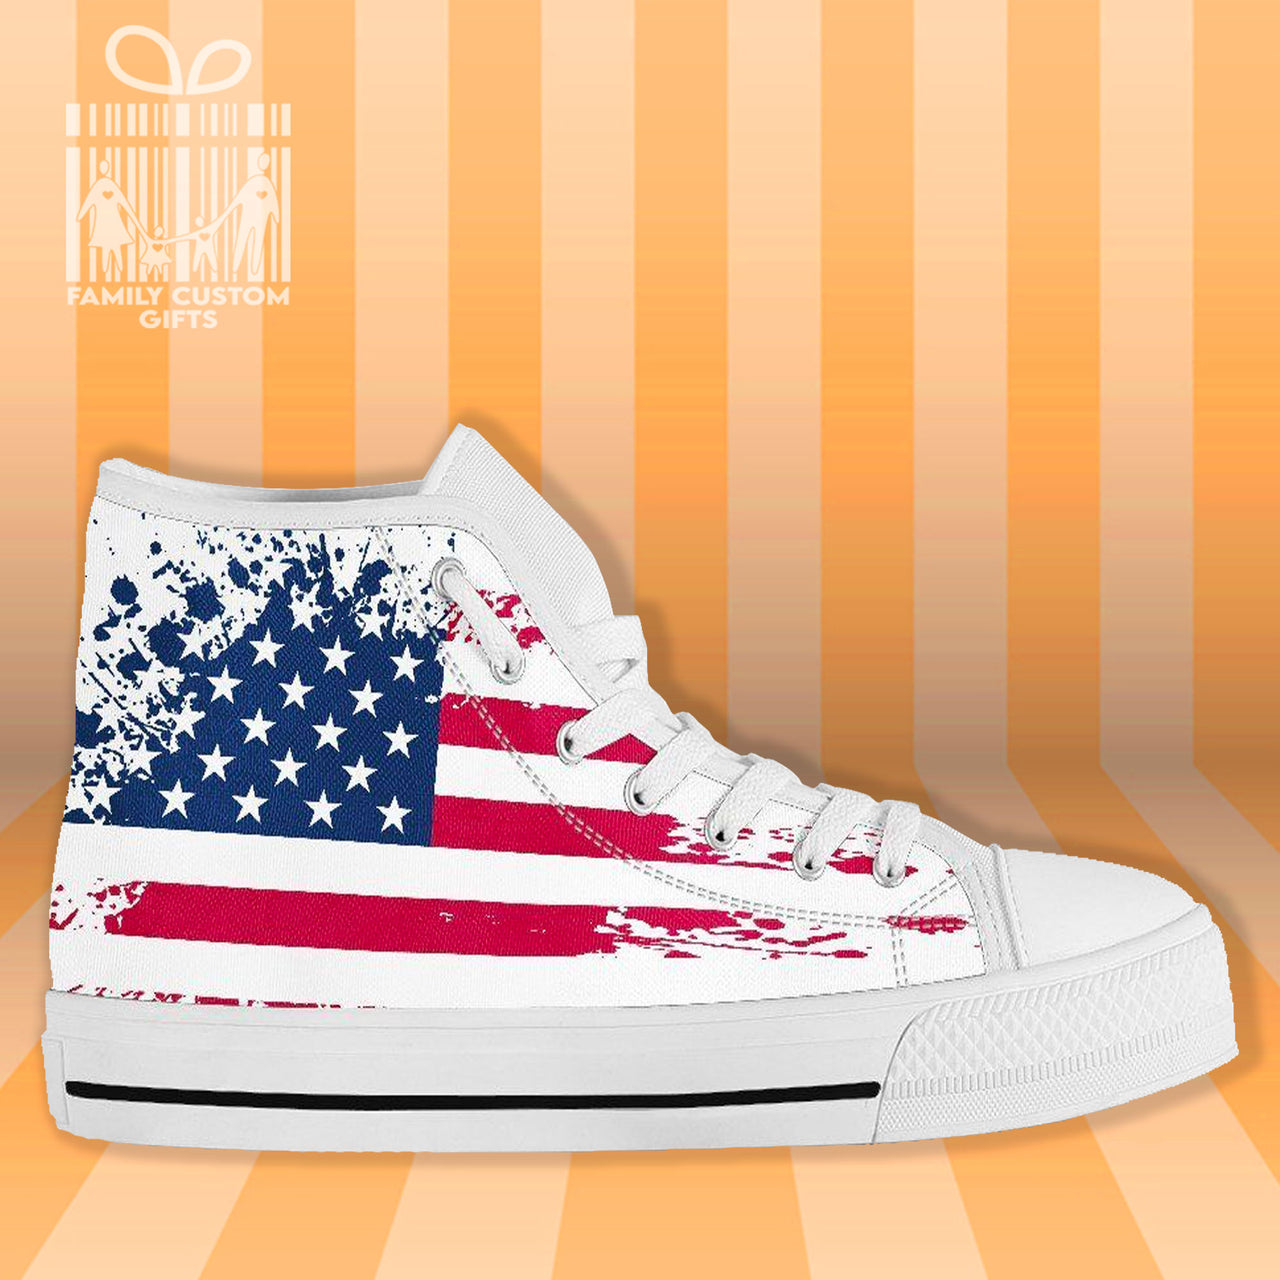 American Flag Retro Grunge High Top Canvas Shoes for Men Women 3D Prints Fashion Sneakers